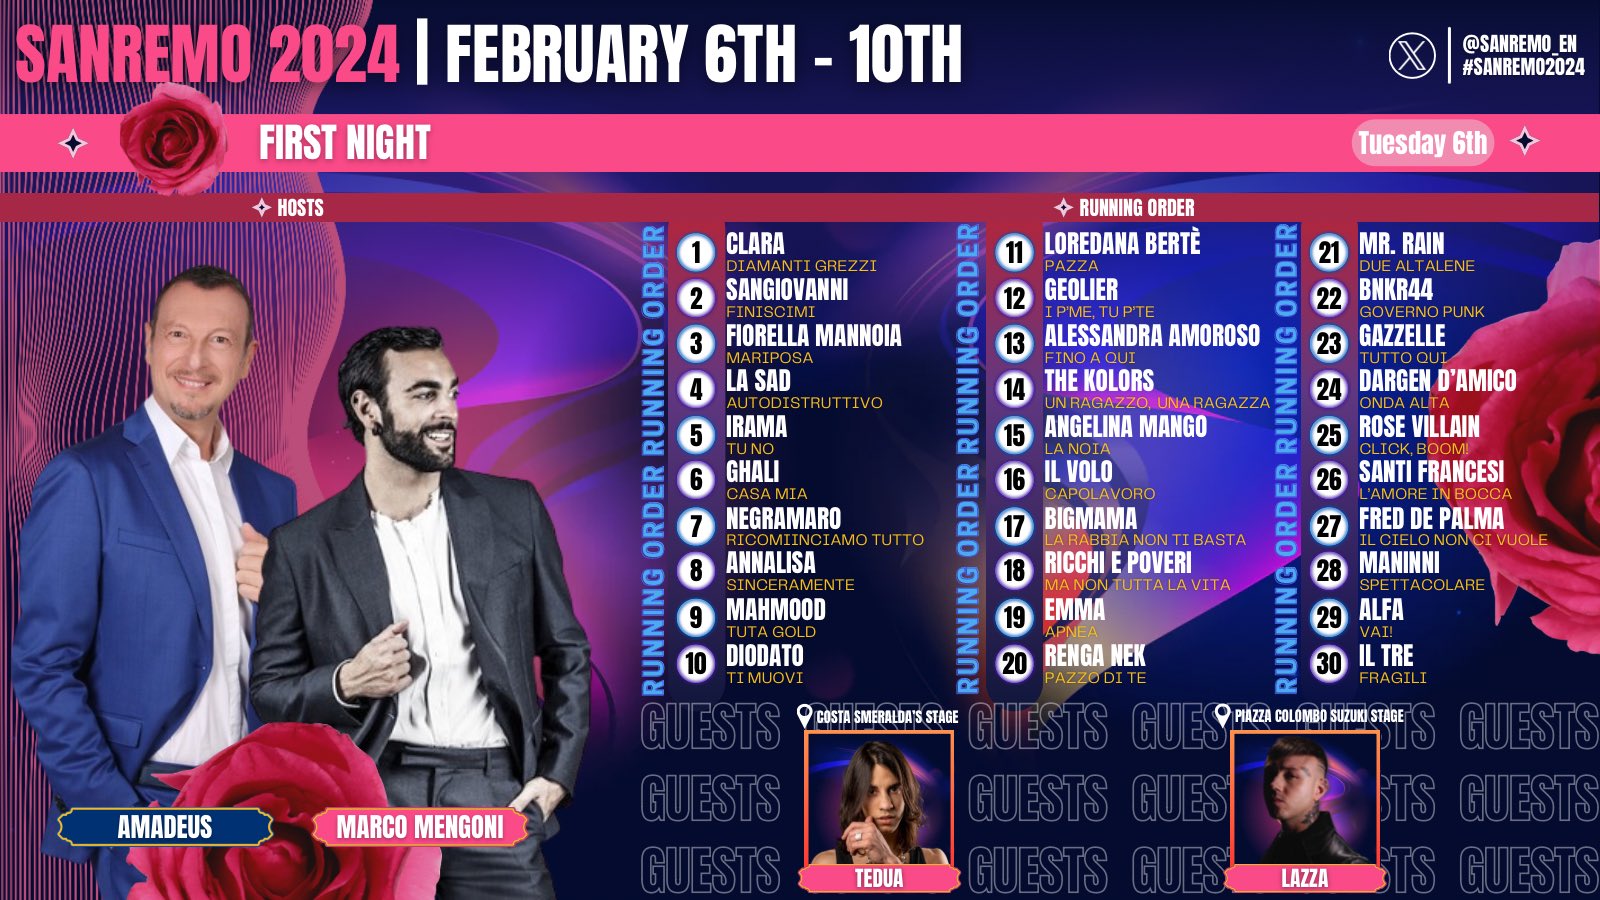 SANREMO 2024: the lineup and guests of the final